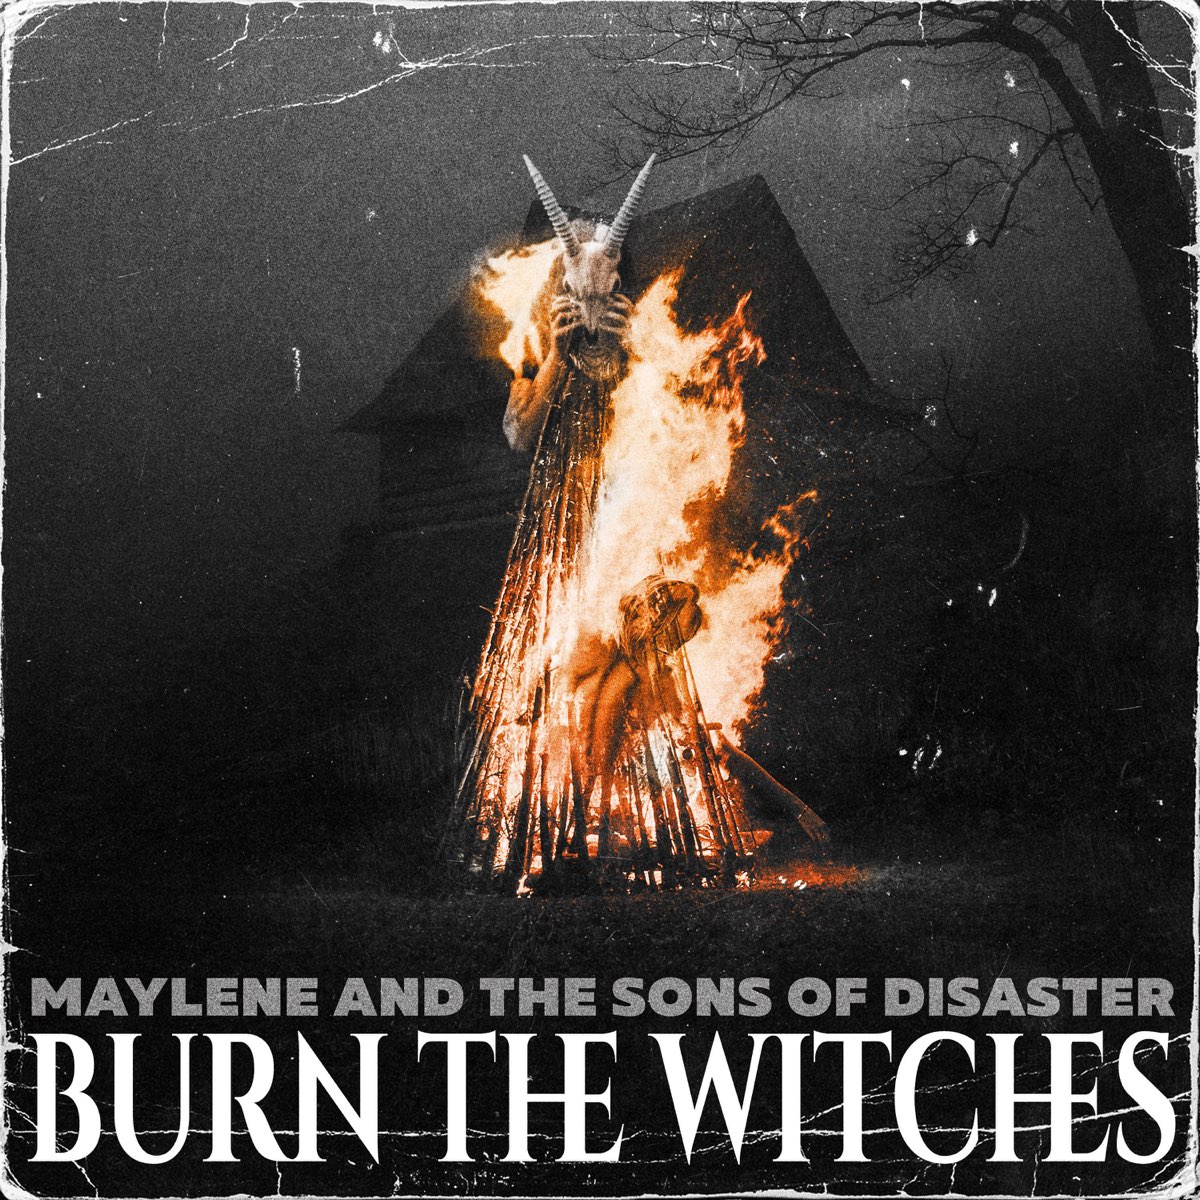 Art for Burn The Witches by Maylene and The Sons of Disaster